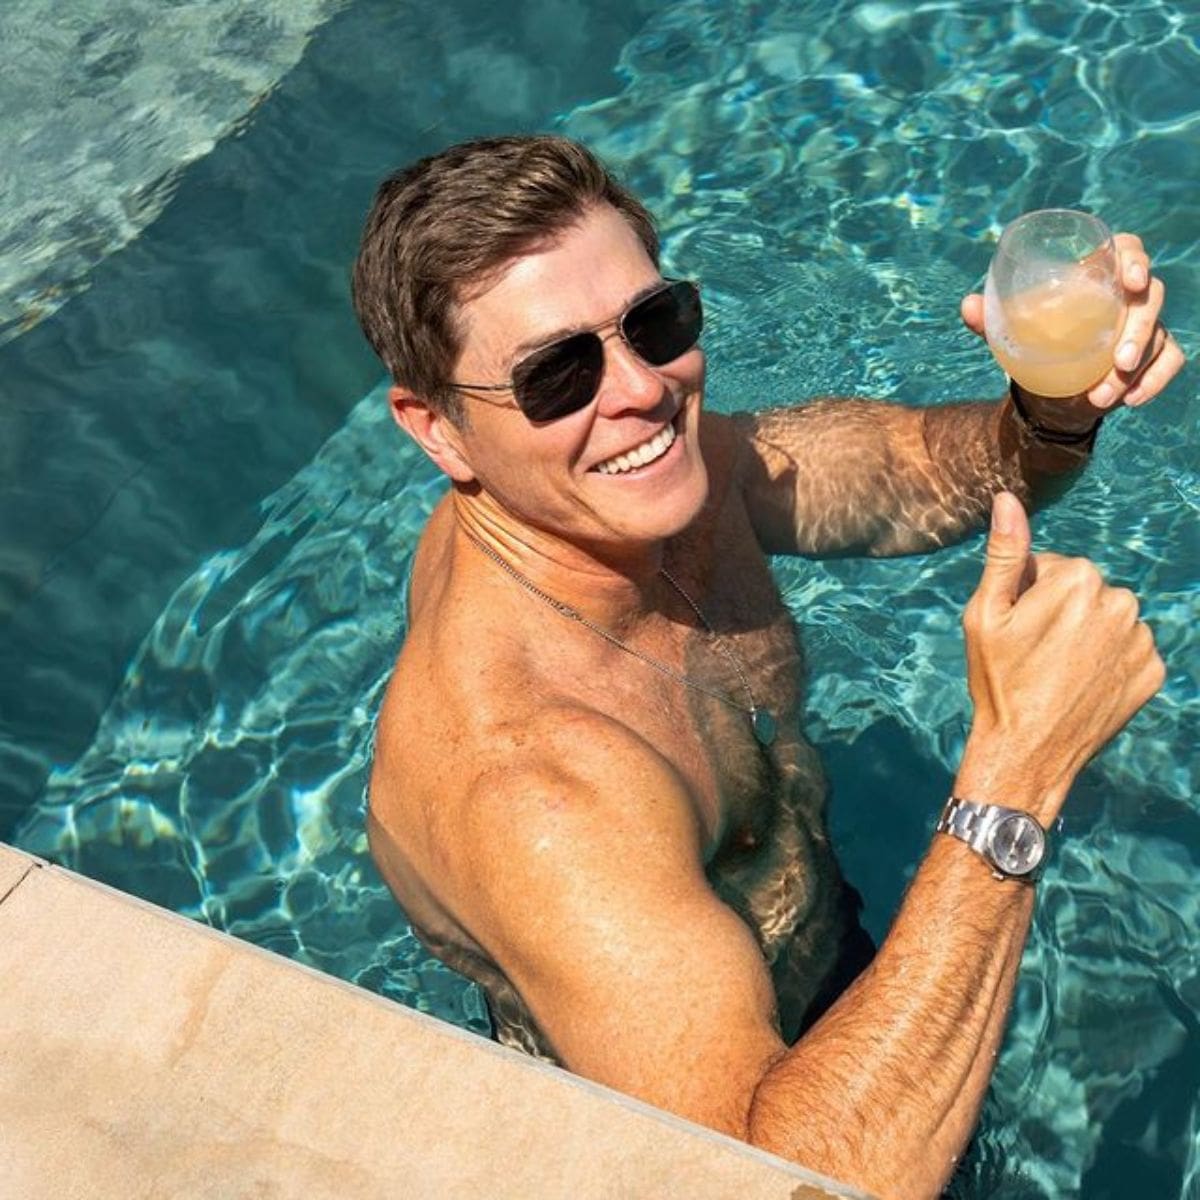 Patrick Whitesell posing for a photo shoot while holding a drink in the swimming pool.